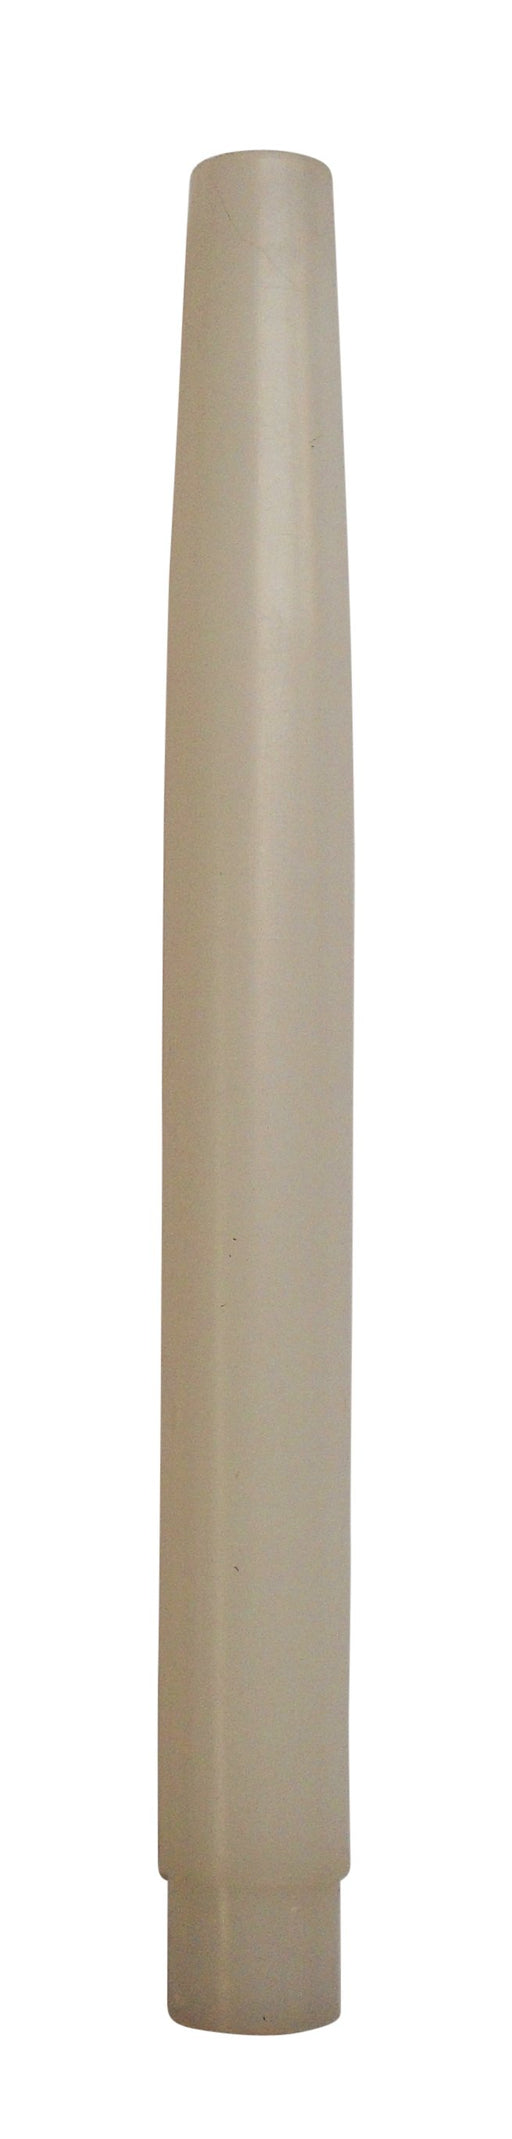 05718 E10 9" French Candle White 10mm Thread Entry - E10, White Plastic, 10mm Thread Entry - Lampfix - Sparks Warehouse